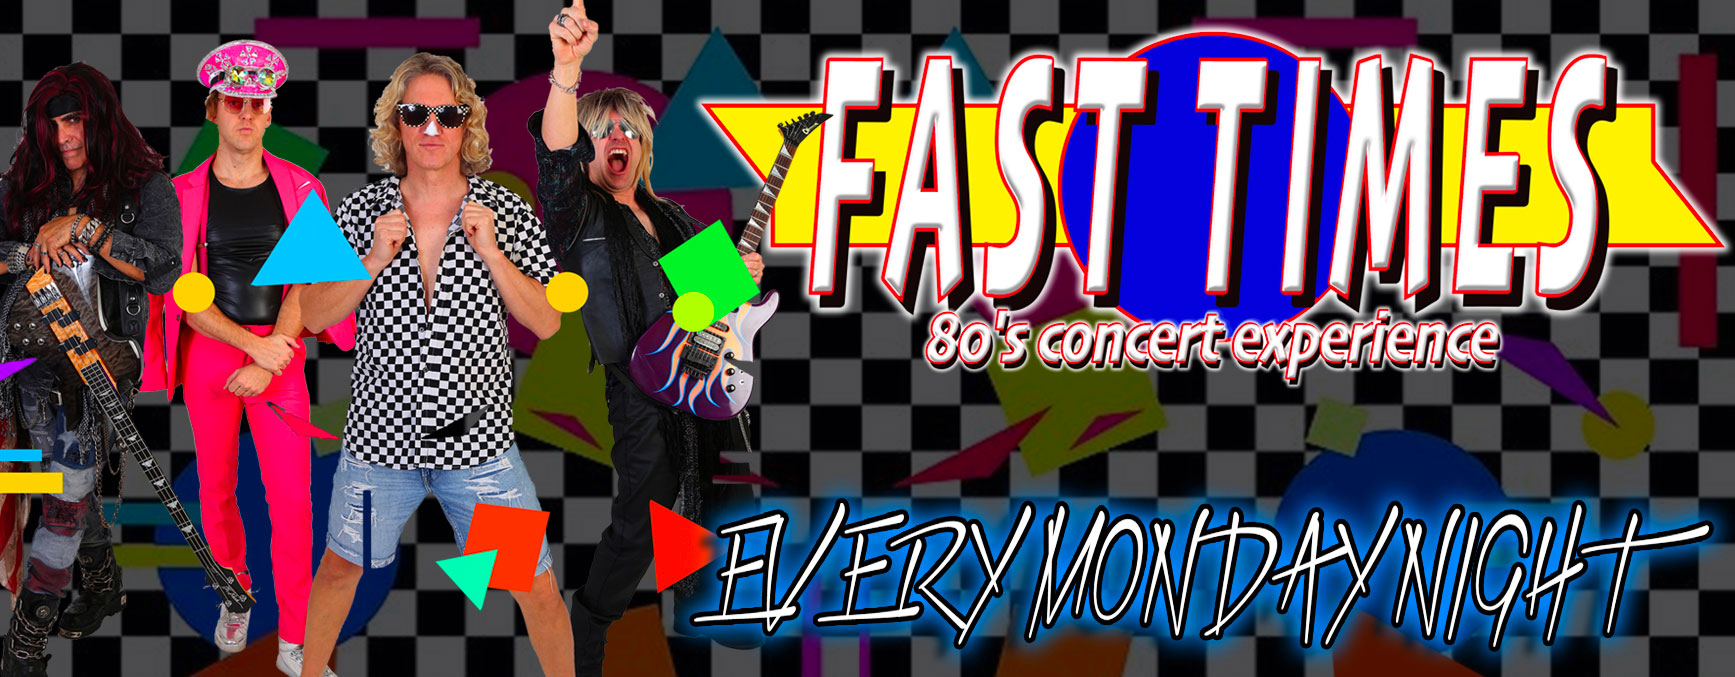 FAST-TIMES-NEW-BANNER-FINAL